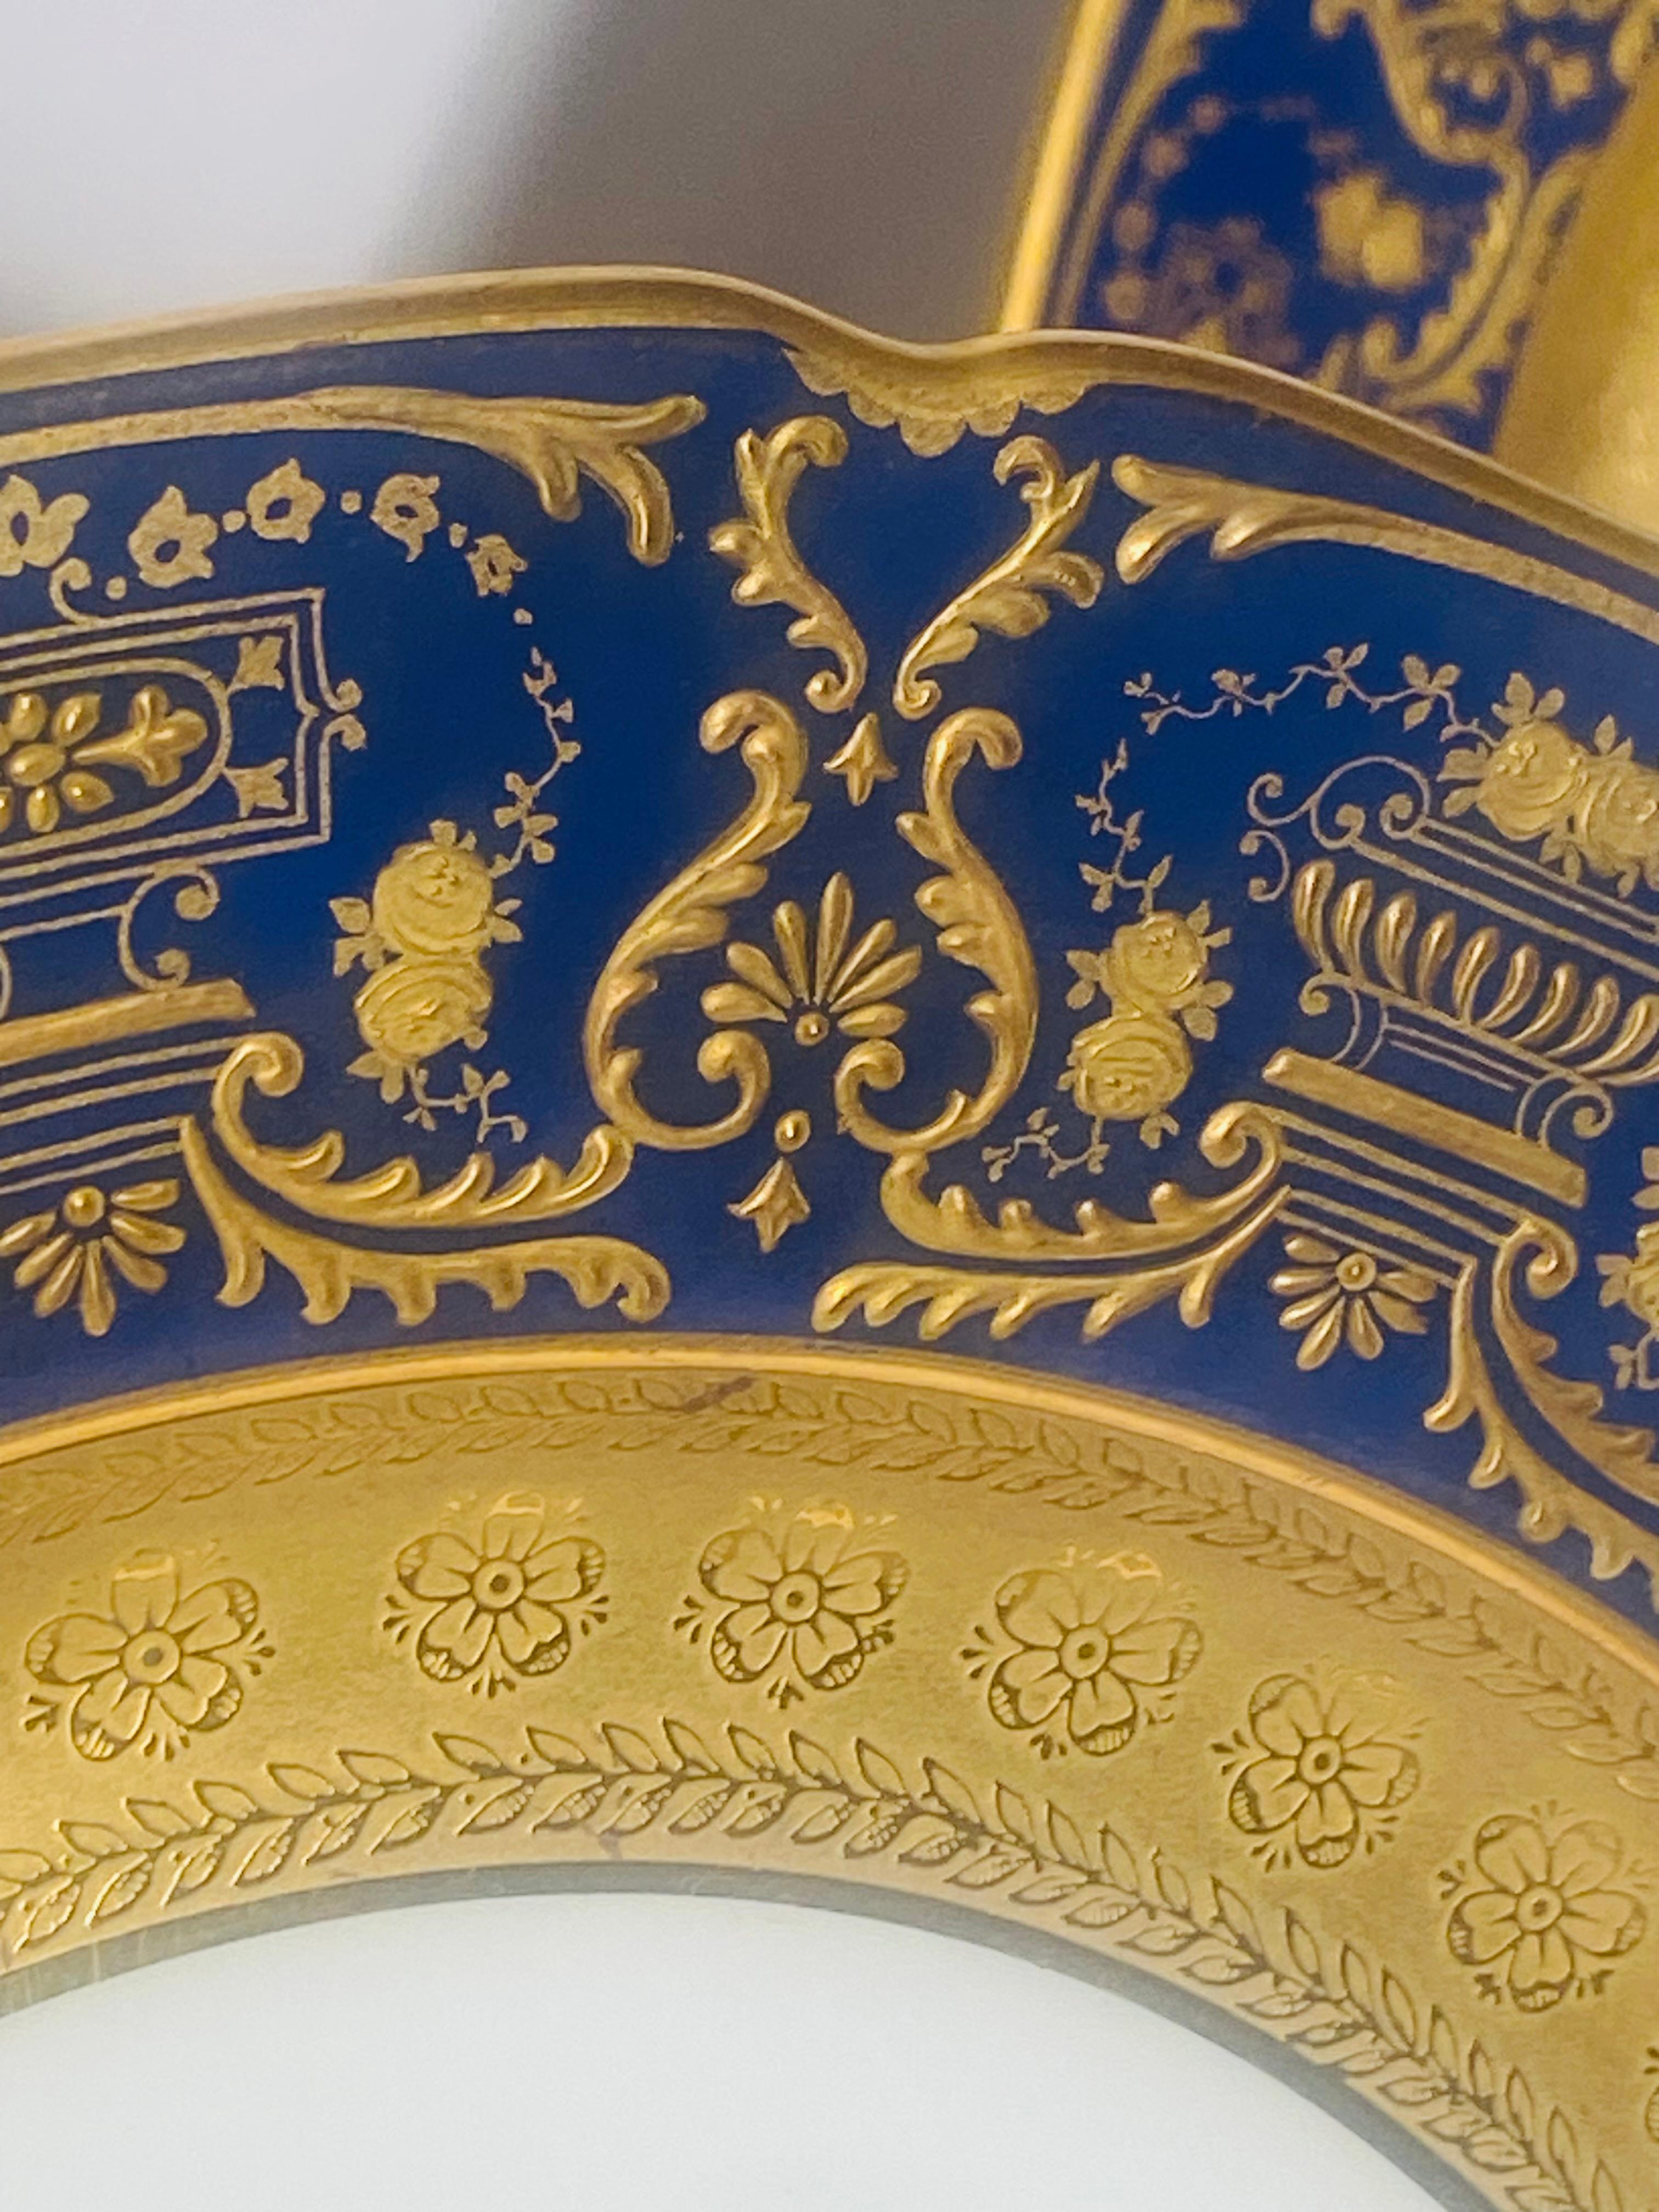 An attractive set of dinner or presentation plates by one of Limoges re known Gilded Age factories, William Guerin. This plate features an elaborate design of raised tooled gilding on their cobalt blue collars and an extra wide 24 karat gold acid